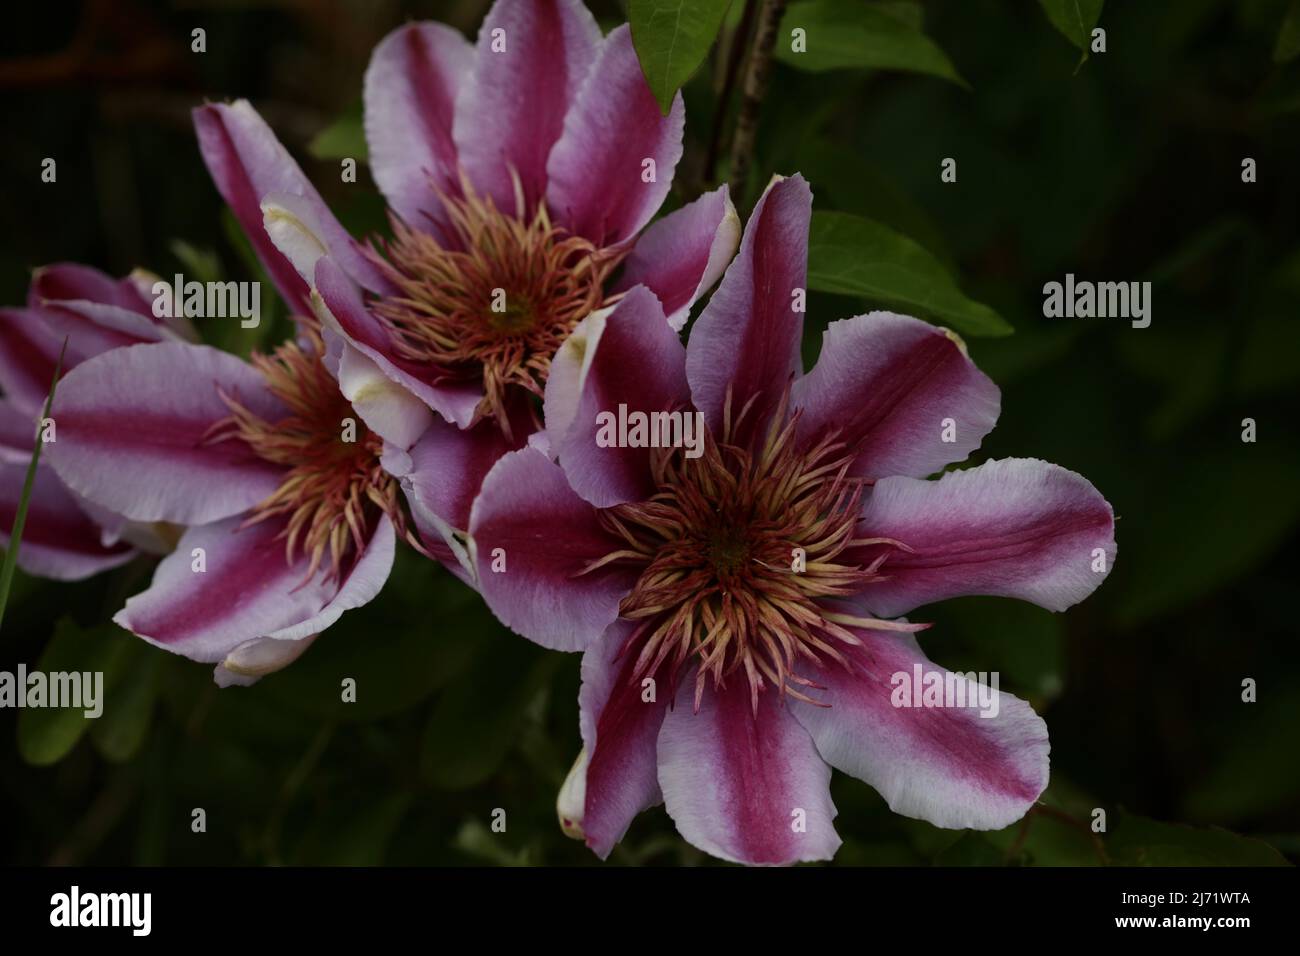 Purple flower blossom close up Clematis viticella family ranunculaceae botanical high quality big size print Stock Photo